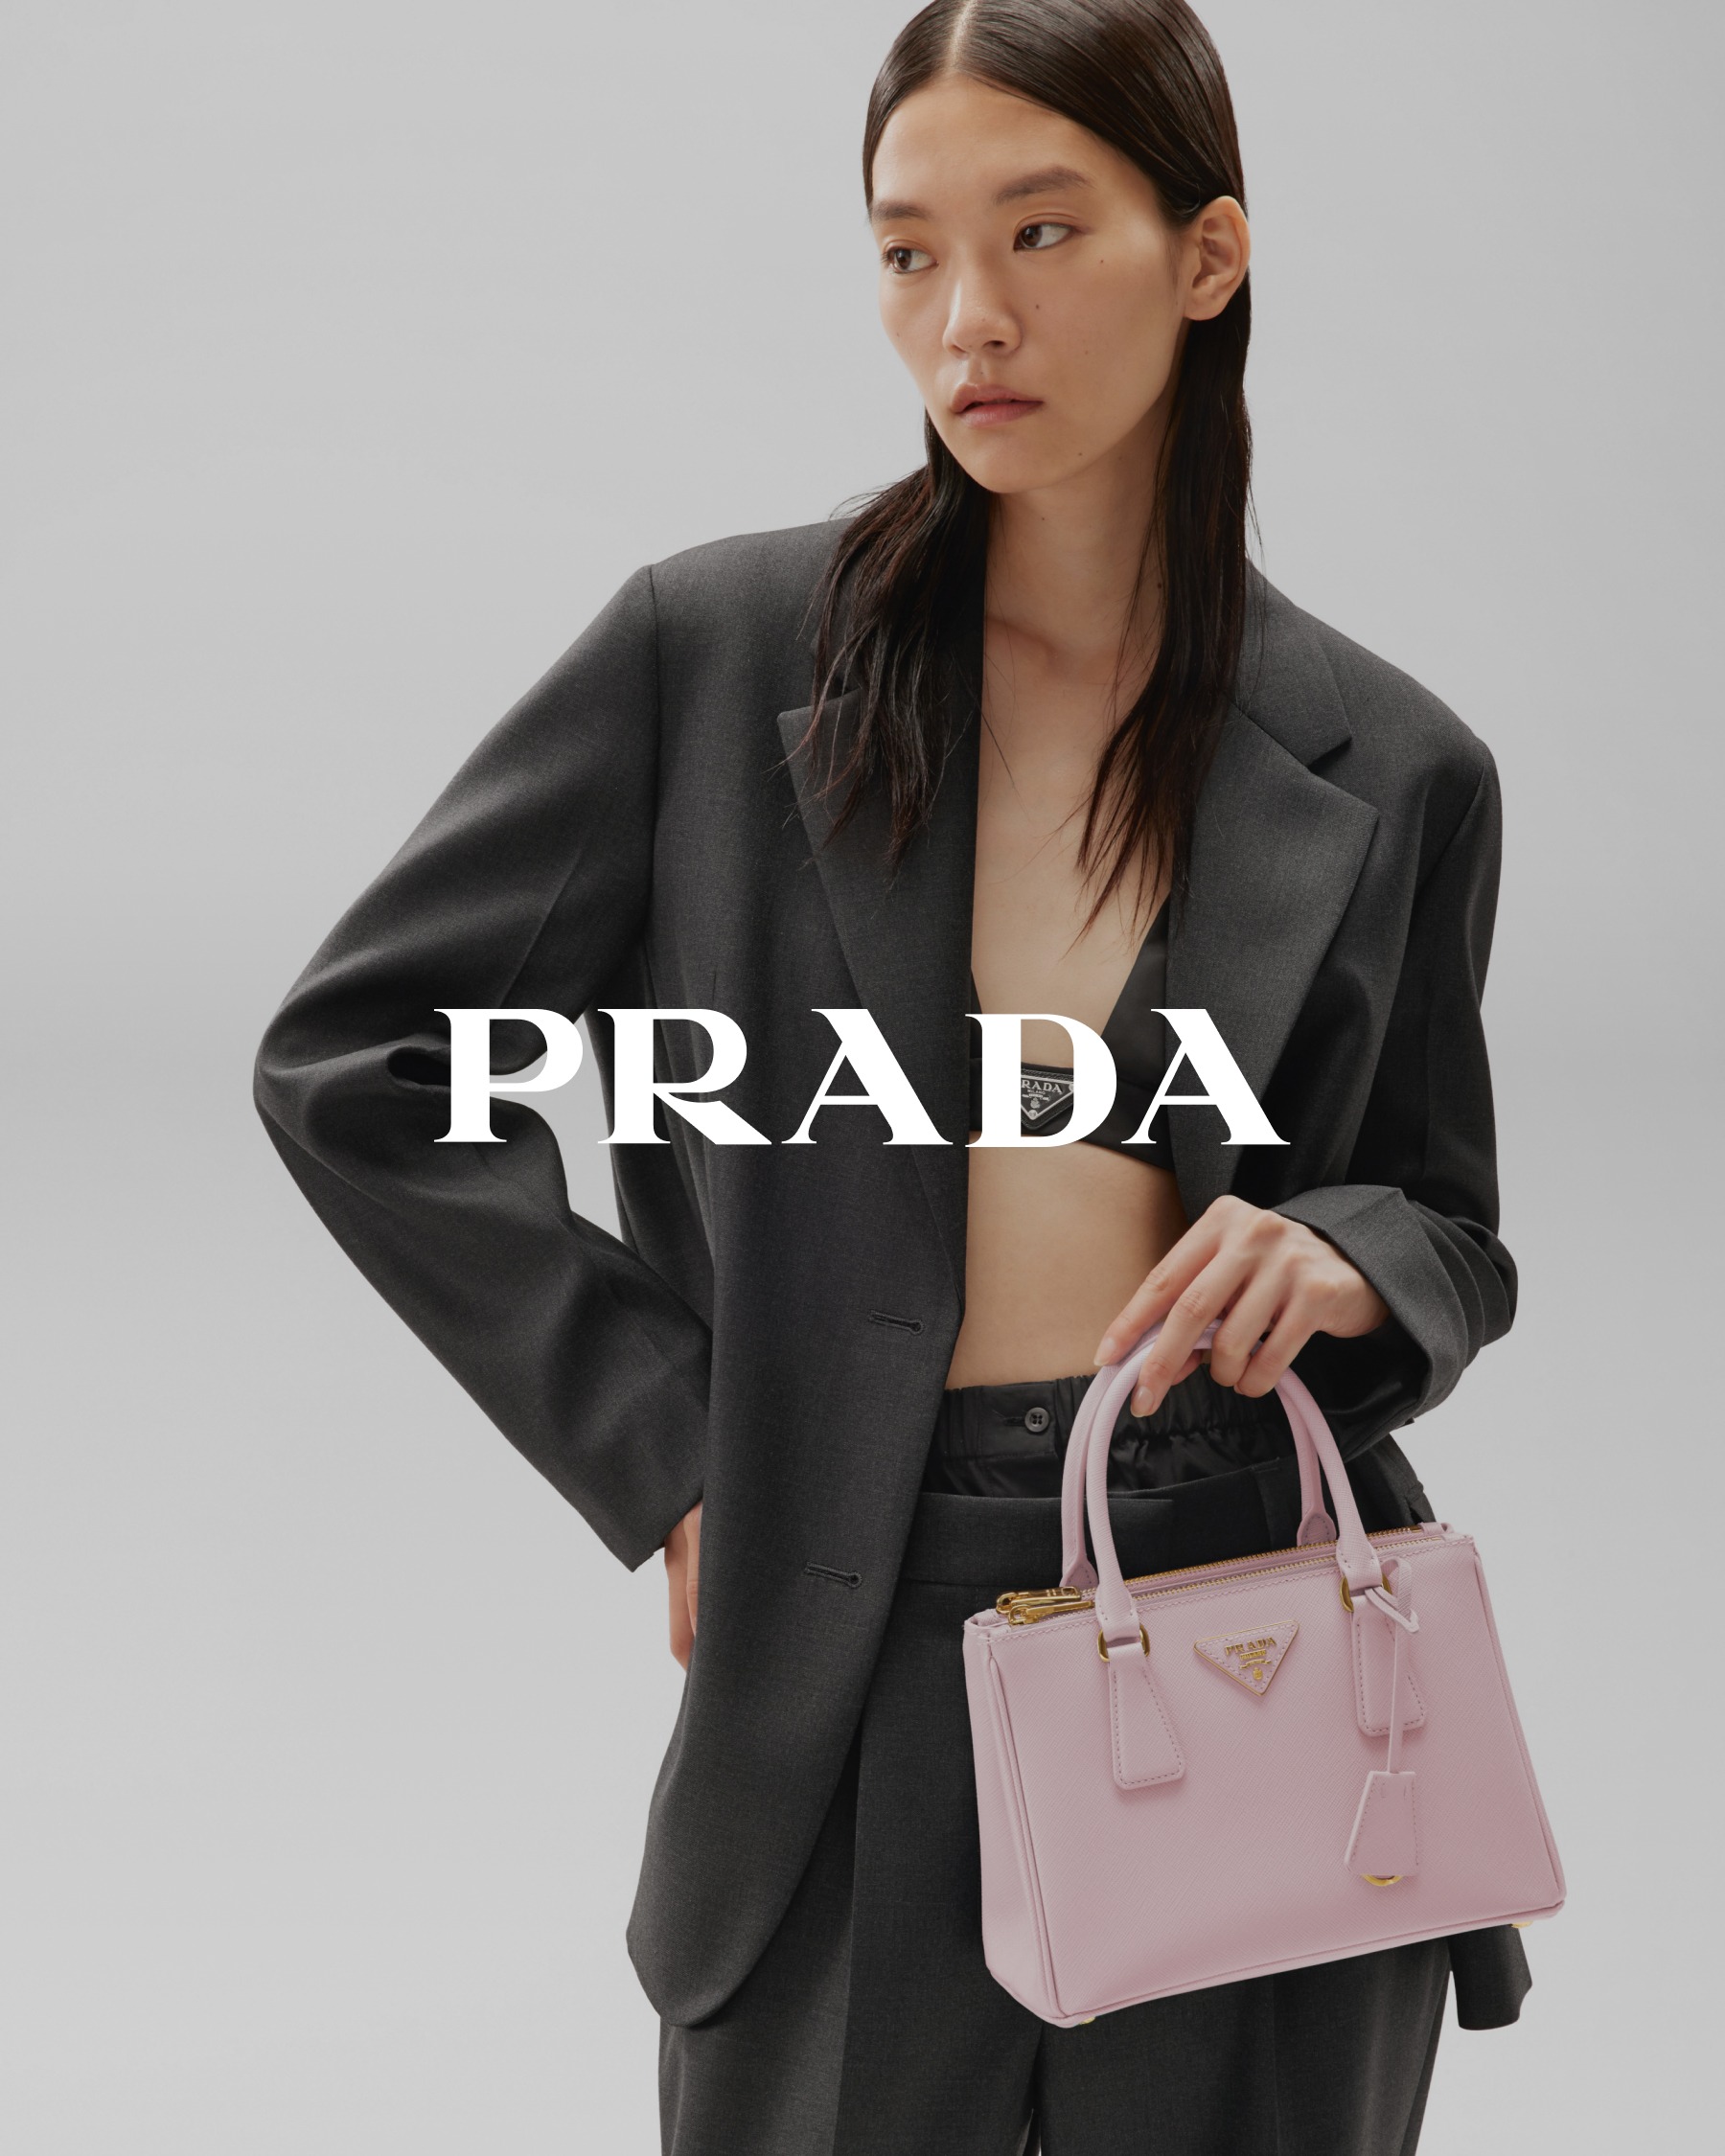 Another #bagspill This stunning Prada bag is designed in a structured shape  with gold-tone hardware. Crafted from Saffiano leather, opens…